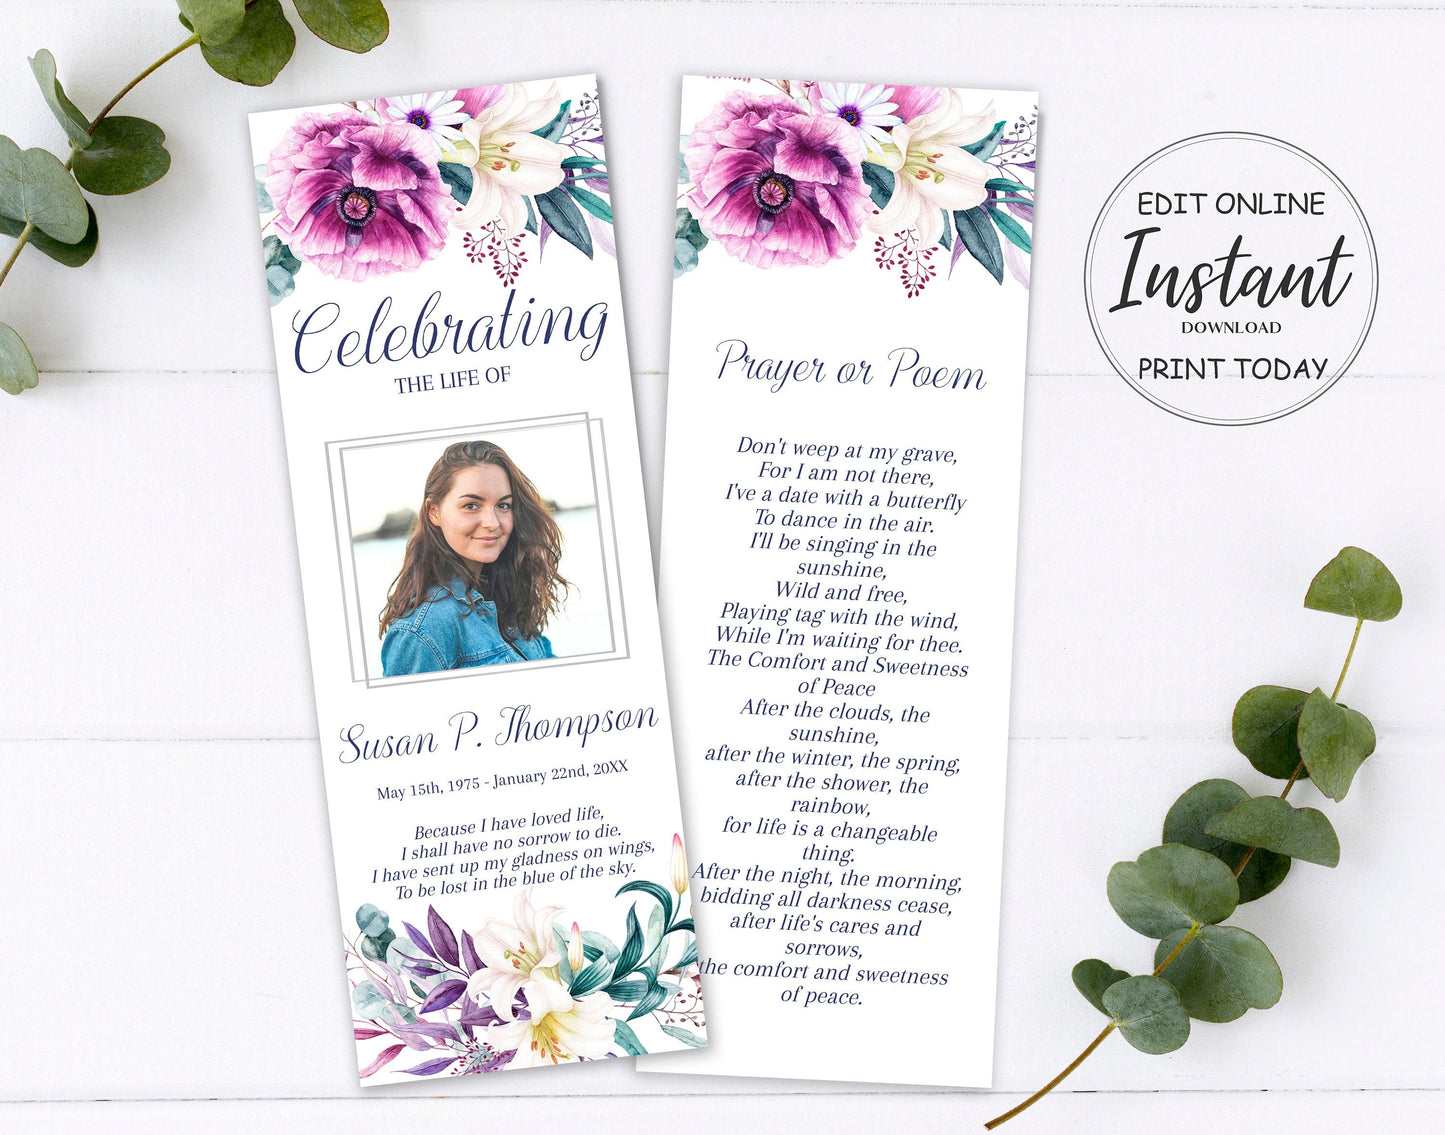 Funeral Program Template Bundle - Everything You Need